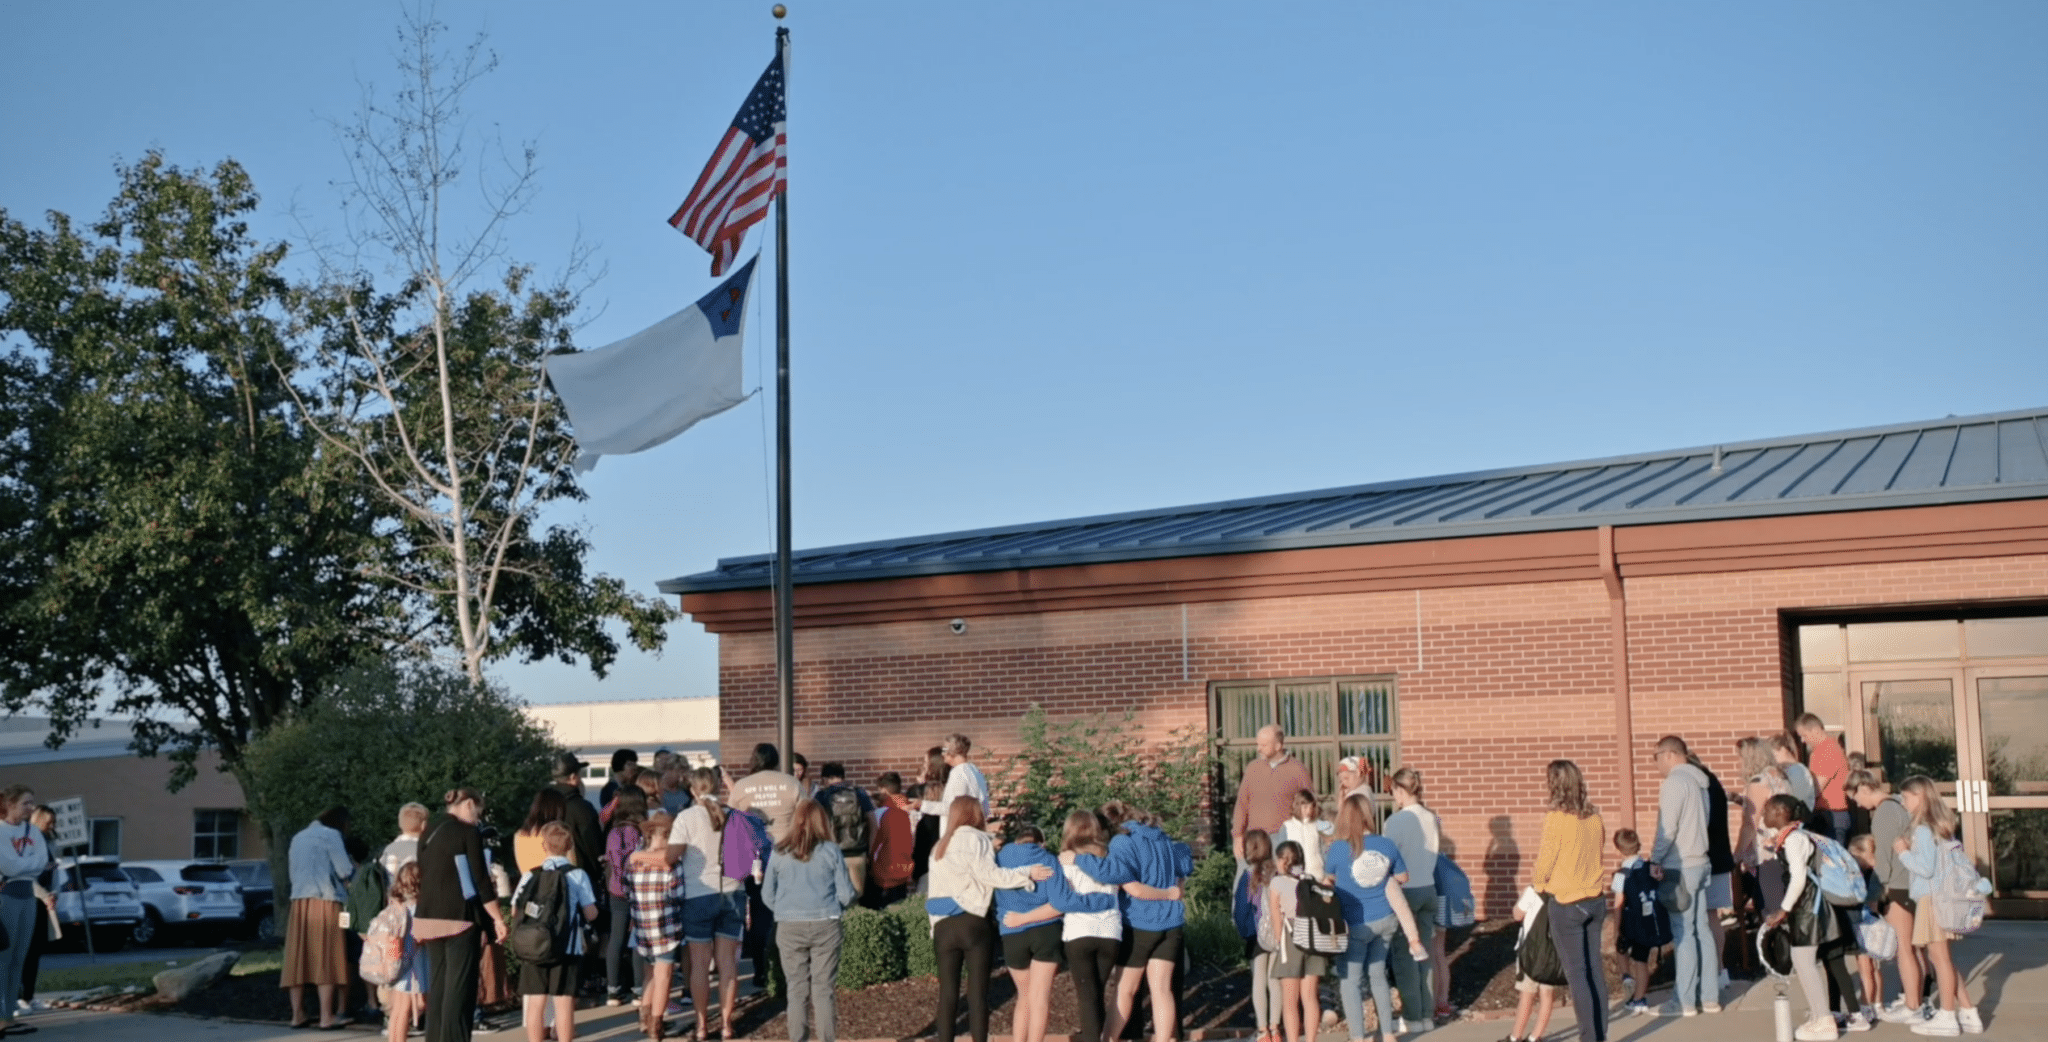 SCA students, teachers, and families met at both SCA Flag Poles to pray for the nationwide See You at the Pole. Pictured here are SCA Elementary families and students who met at the flagpole to unite in prayer over the students, school, and nation during 2023’s See You at the Pole event.